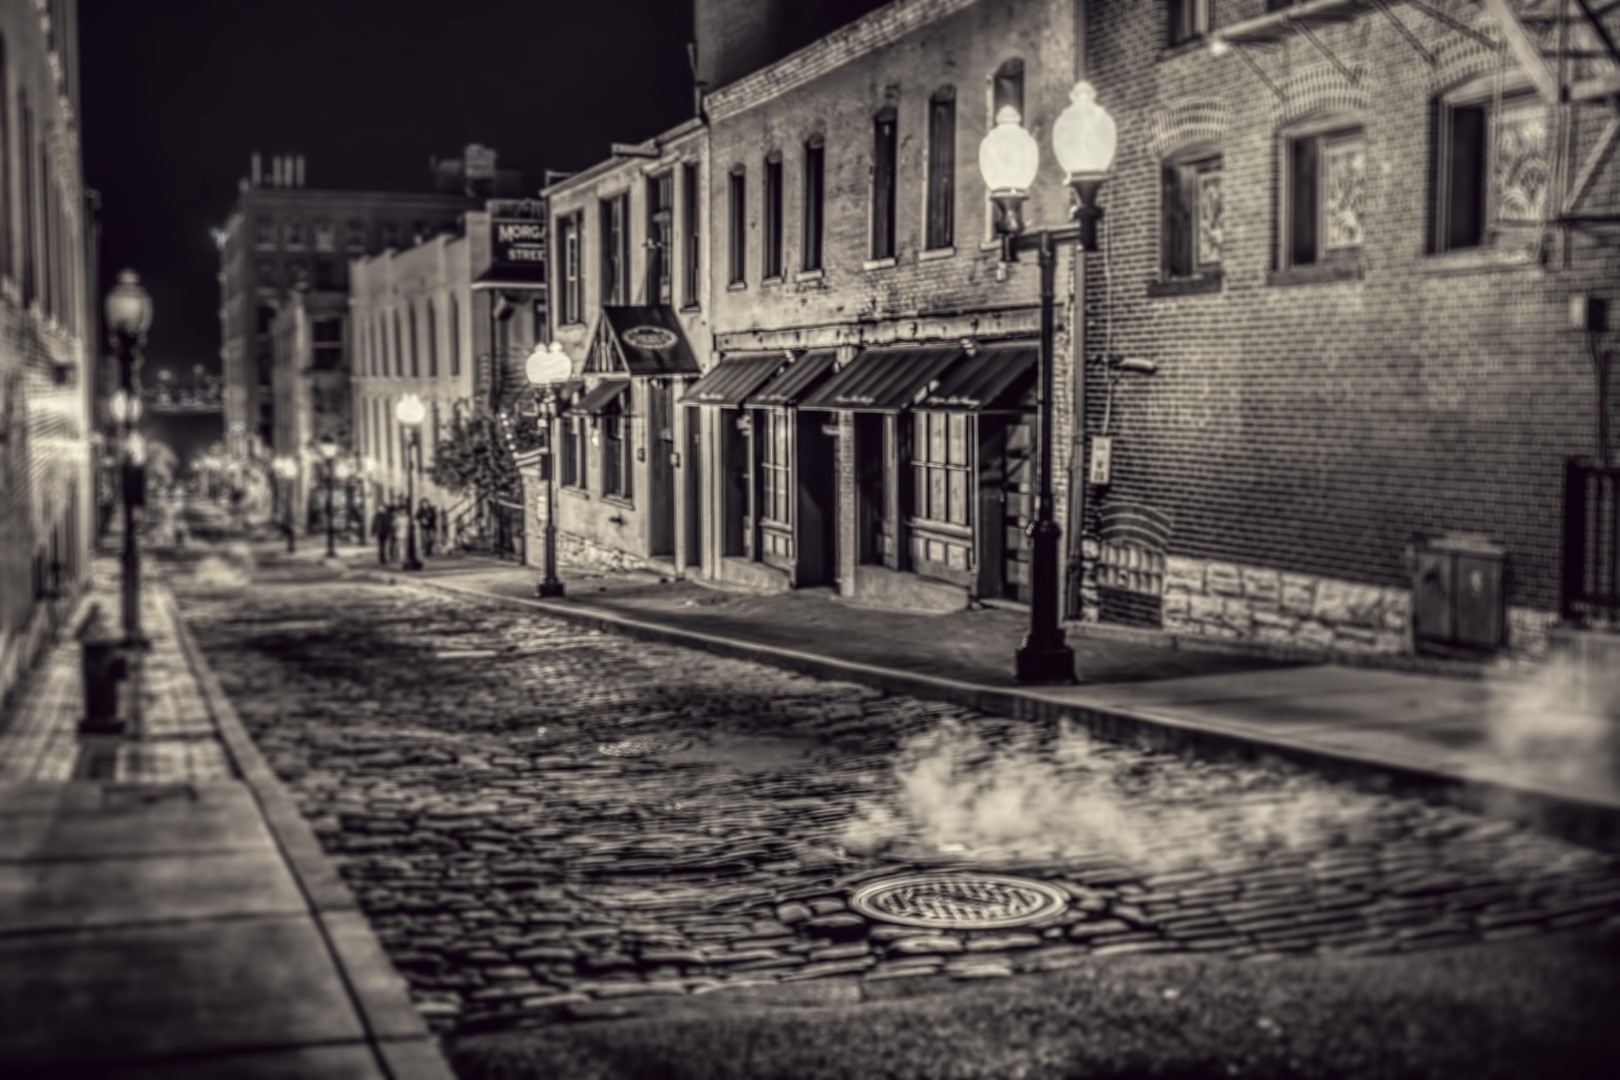 A quiet night along Laclede's Landing in downtown St. Louis